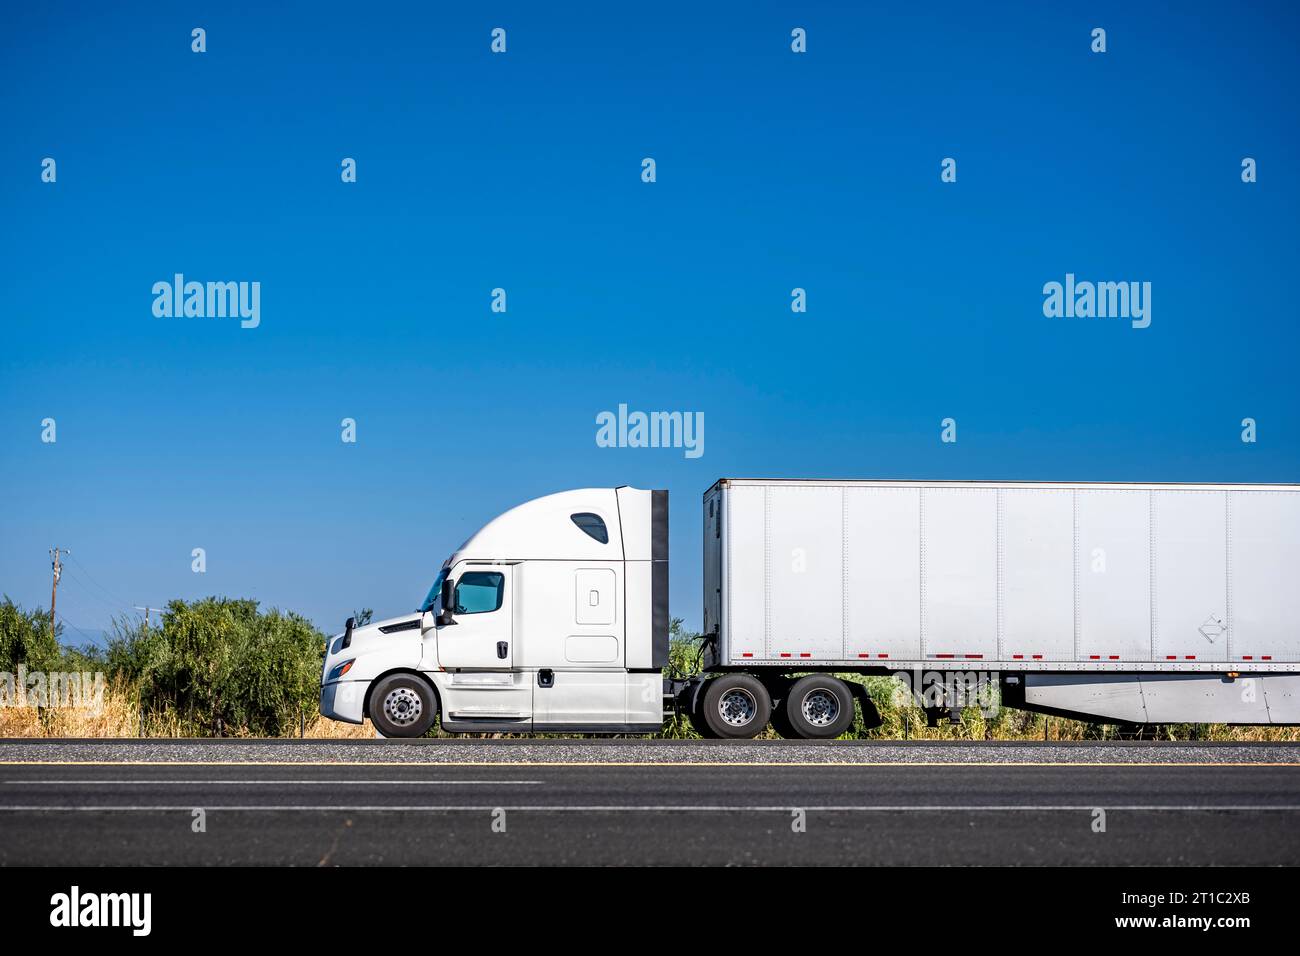 White industrial carrier big rig semi truck tractor with extended cab for truck driver rest  transporting commercial cargo in dry van semi trailer run Stock Photo